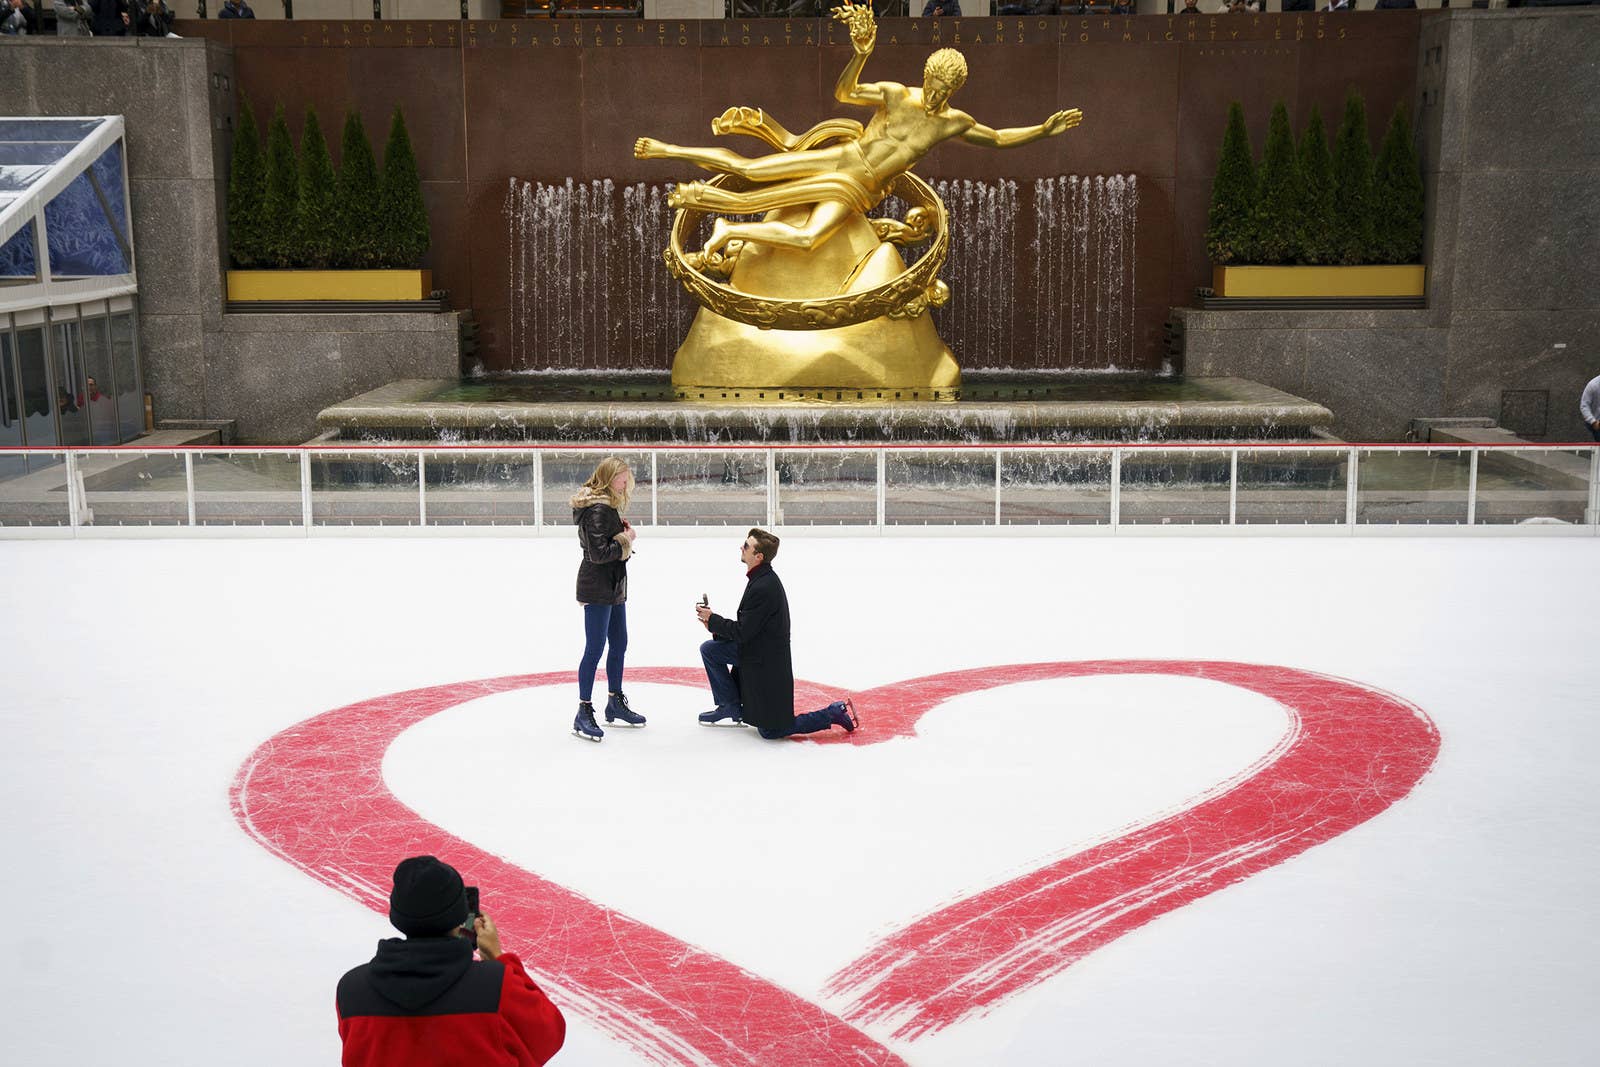 Jacob Cox proposes to Cierra Sorrells on Valentine's Day at the Rockefeller Center ice rink on Feb. 14, in New York City. Sorrells said yes.